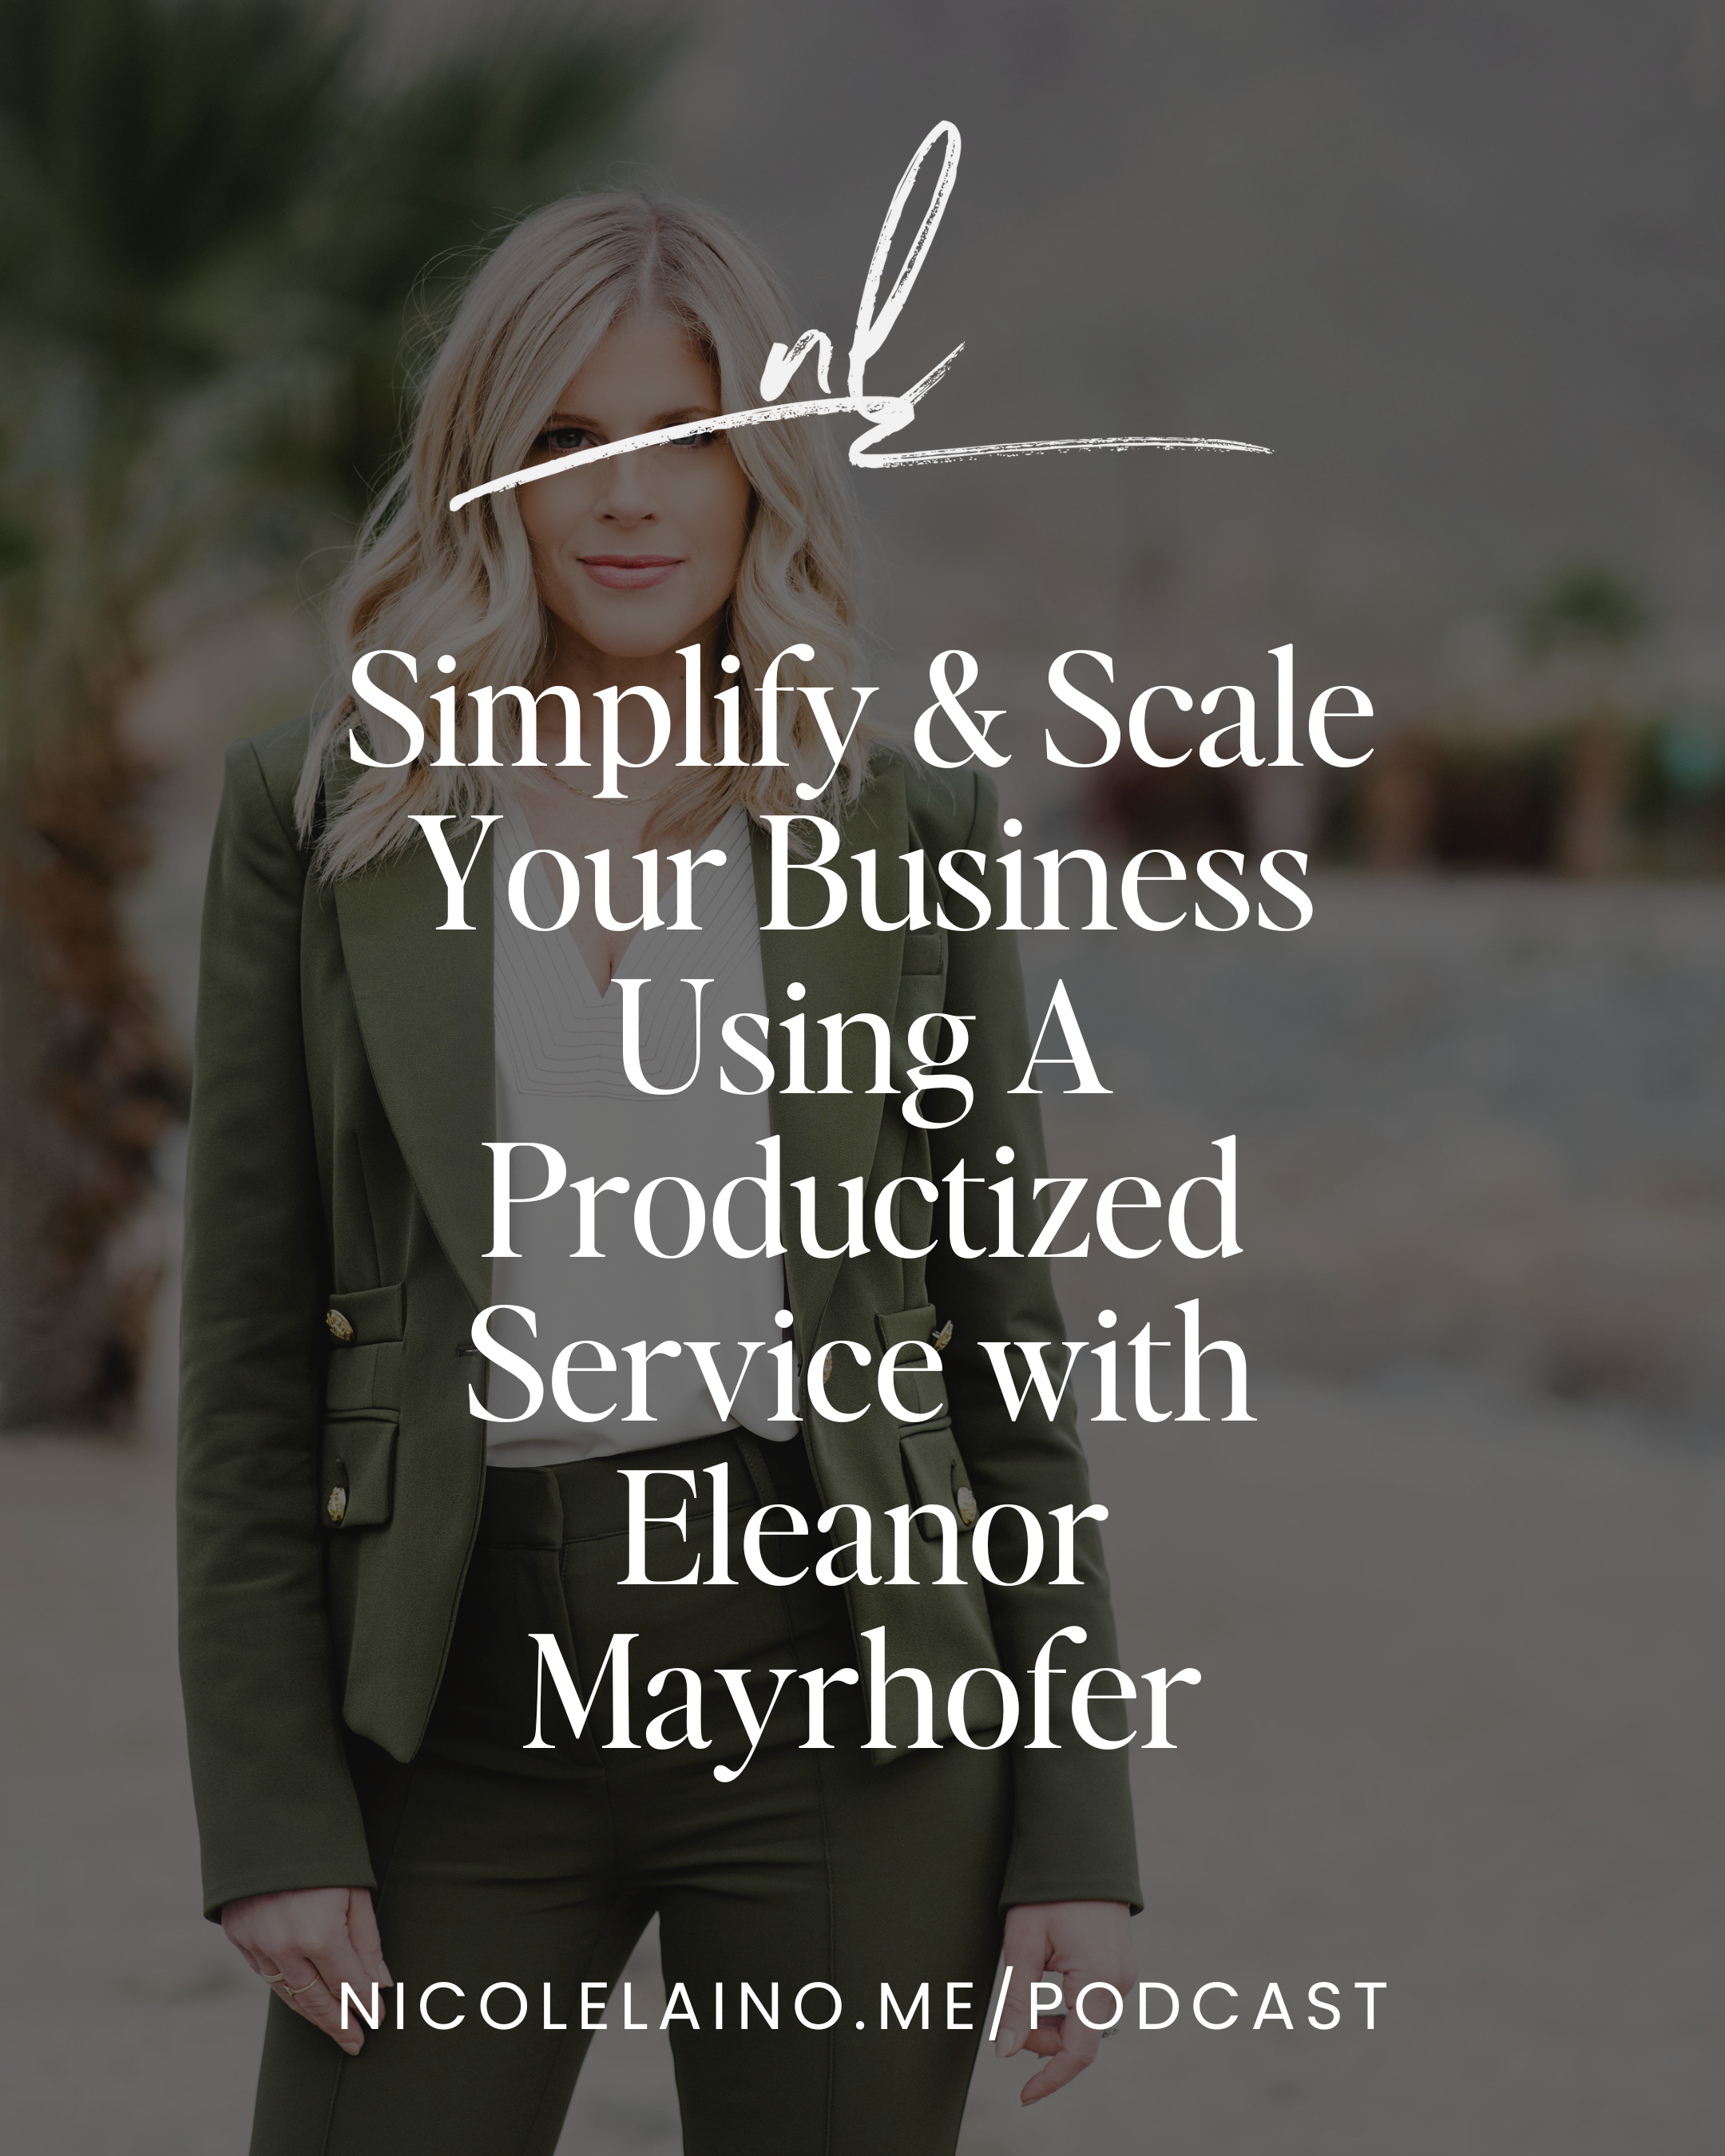 Simplify & Scale Your Business Using A Productized Service with Eleanor Mayrhofer